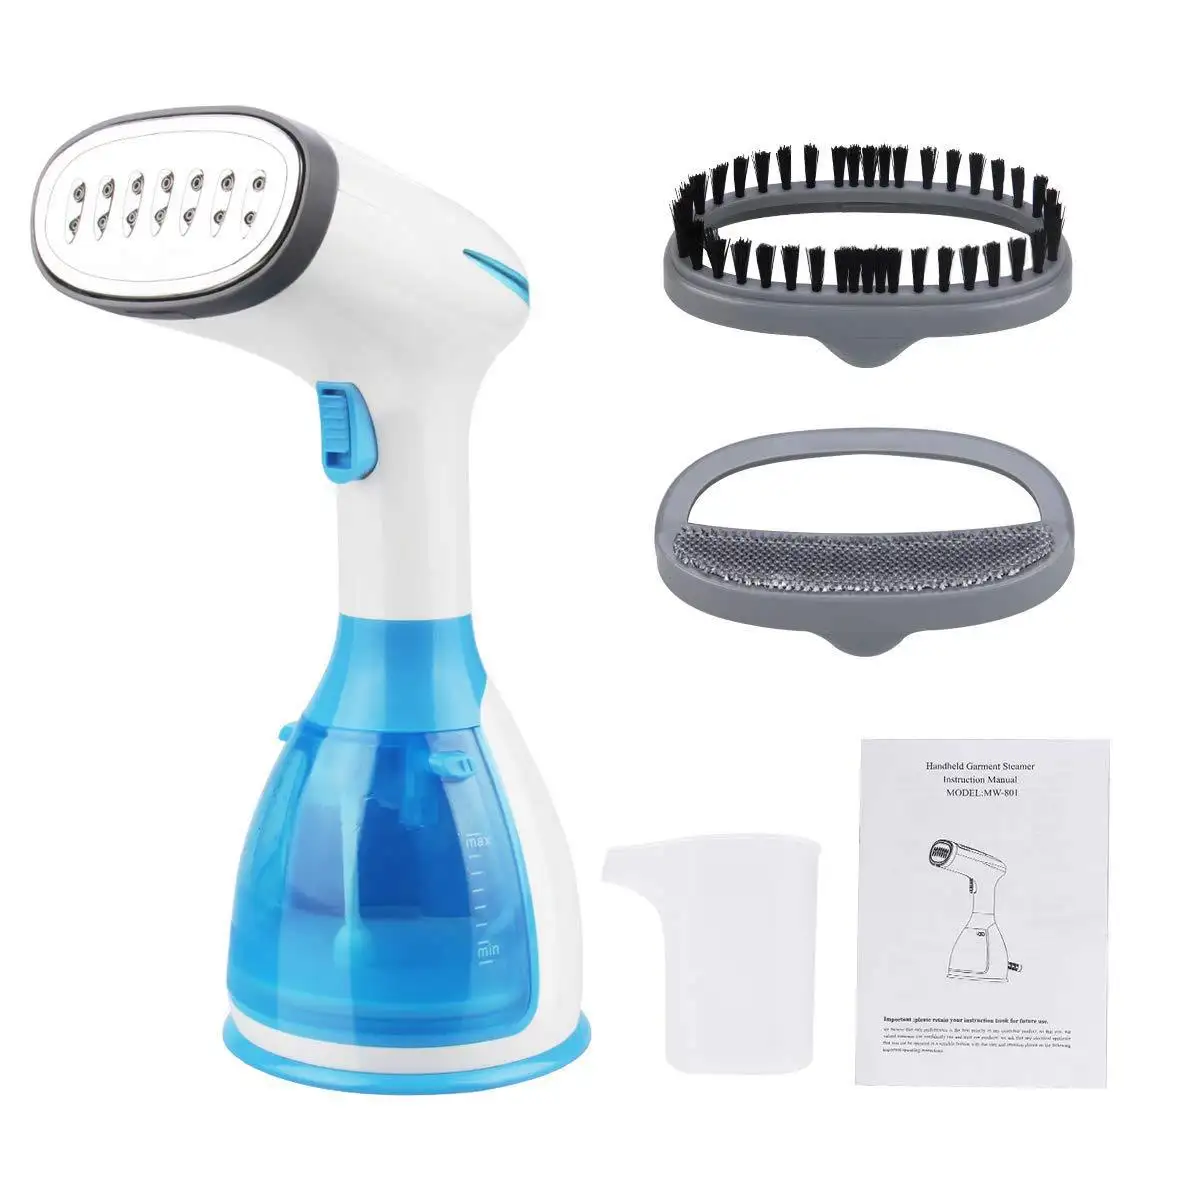 Steam Iron Garment Steamer Handheld Fabric 1500W Travel Vertical Mini Portable Home Travelling For Clothes Ironing